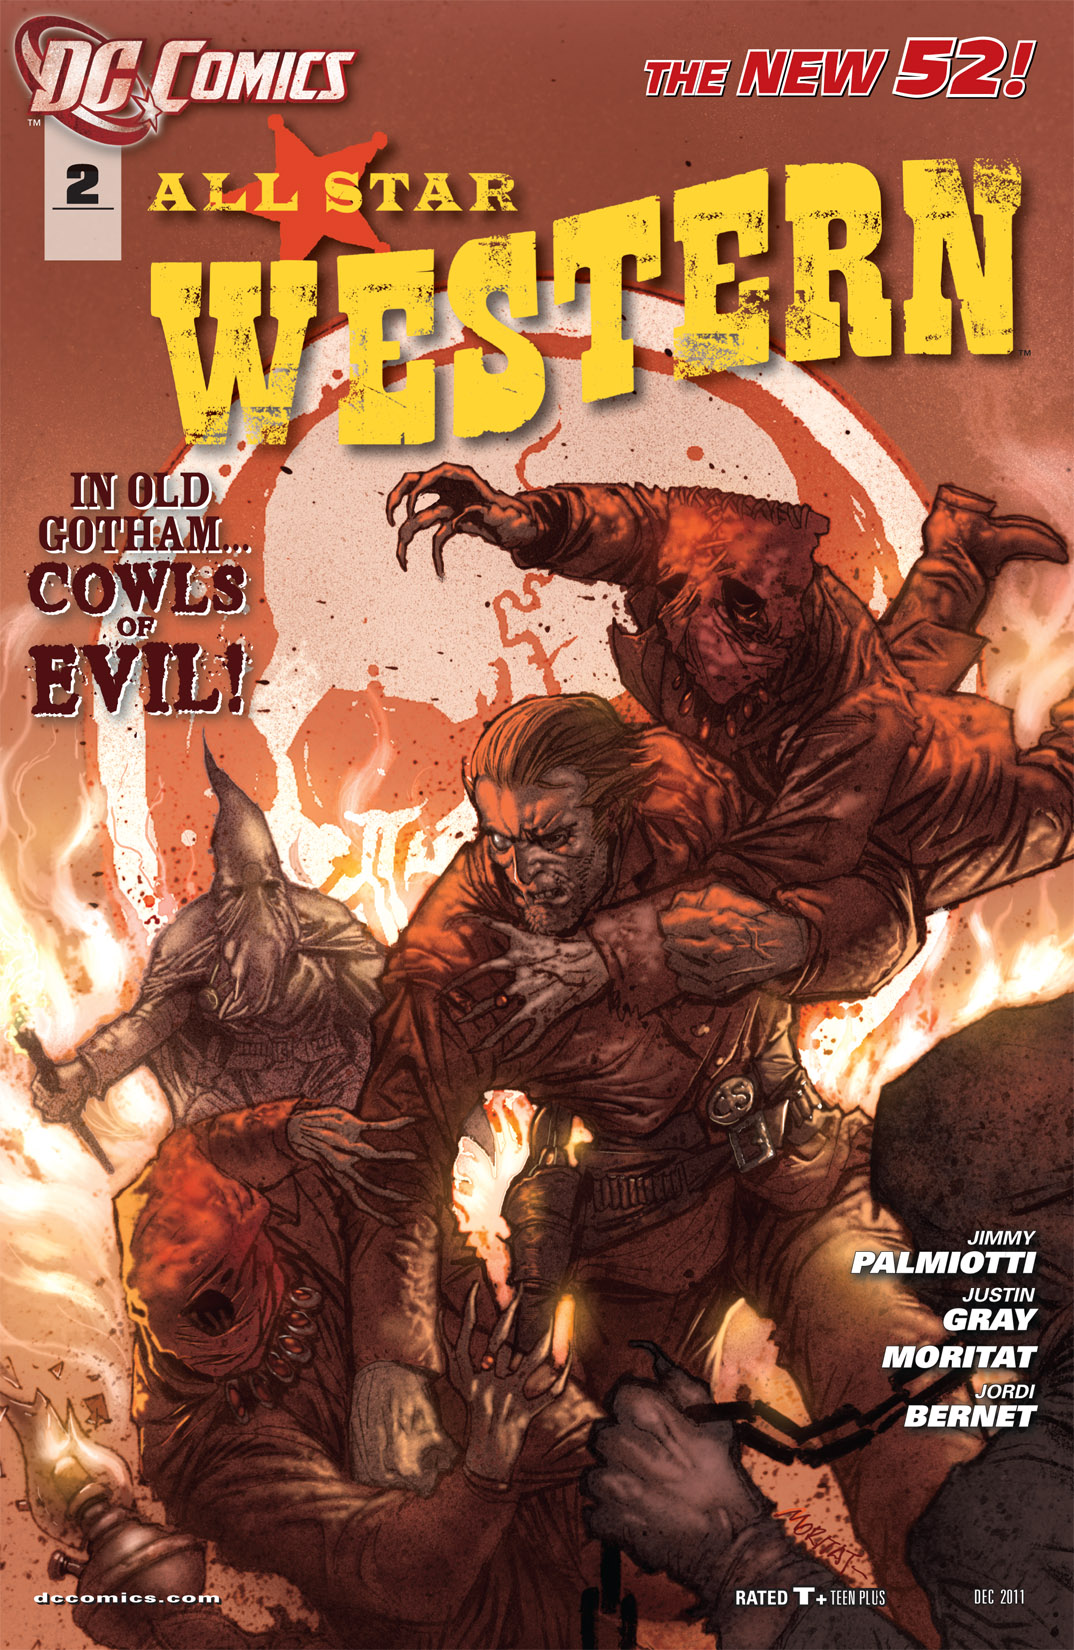 All-Star Western Pics, Comics Collection